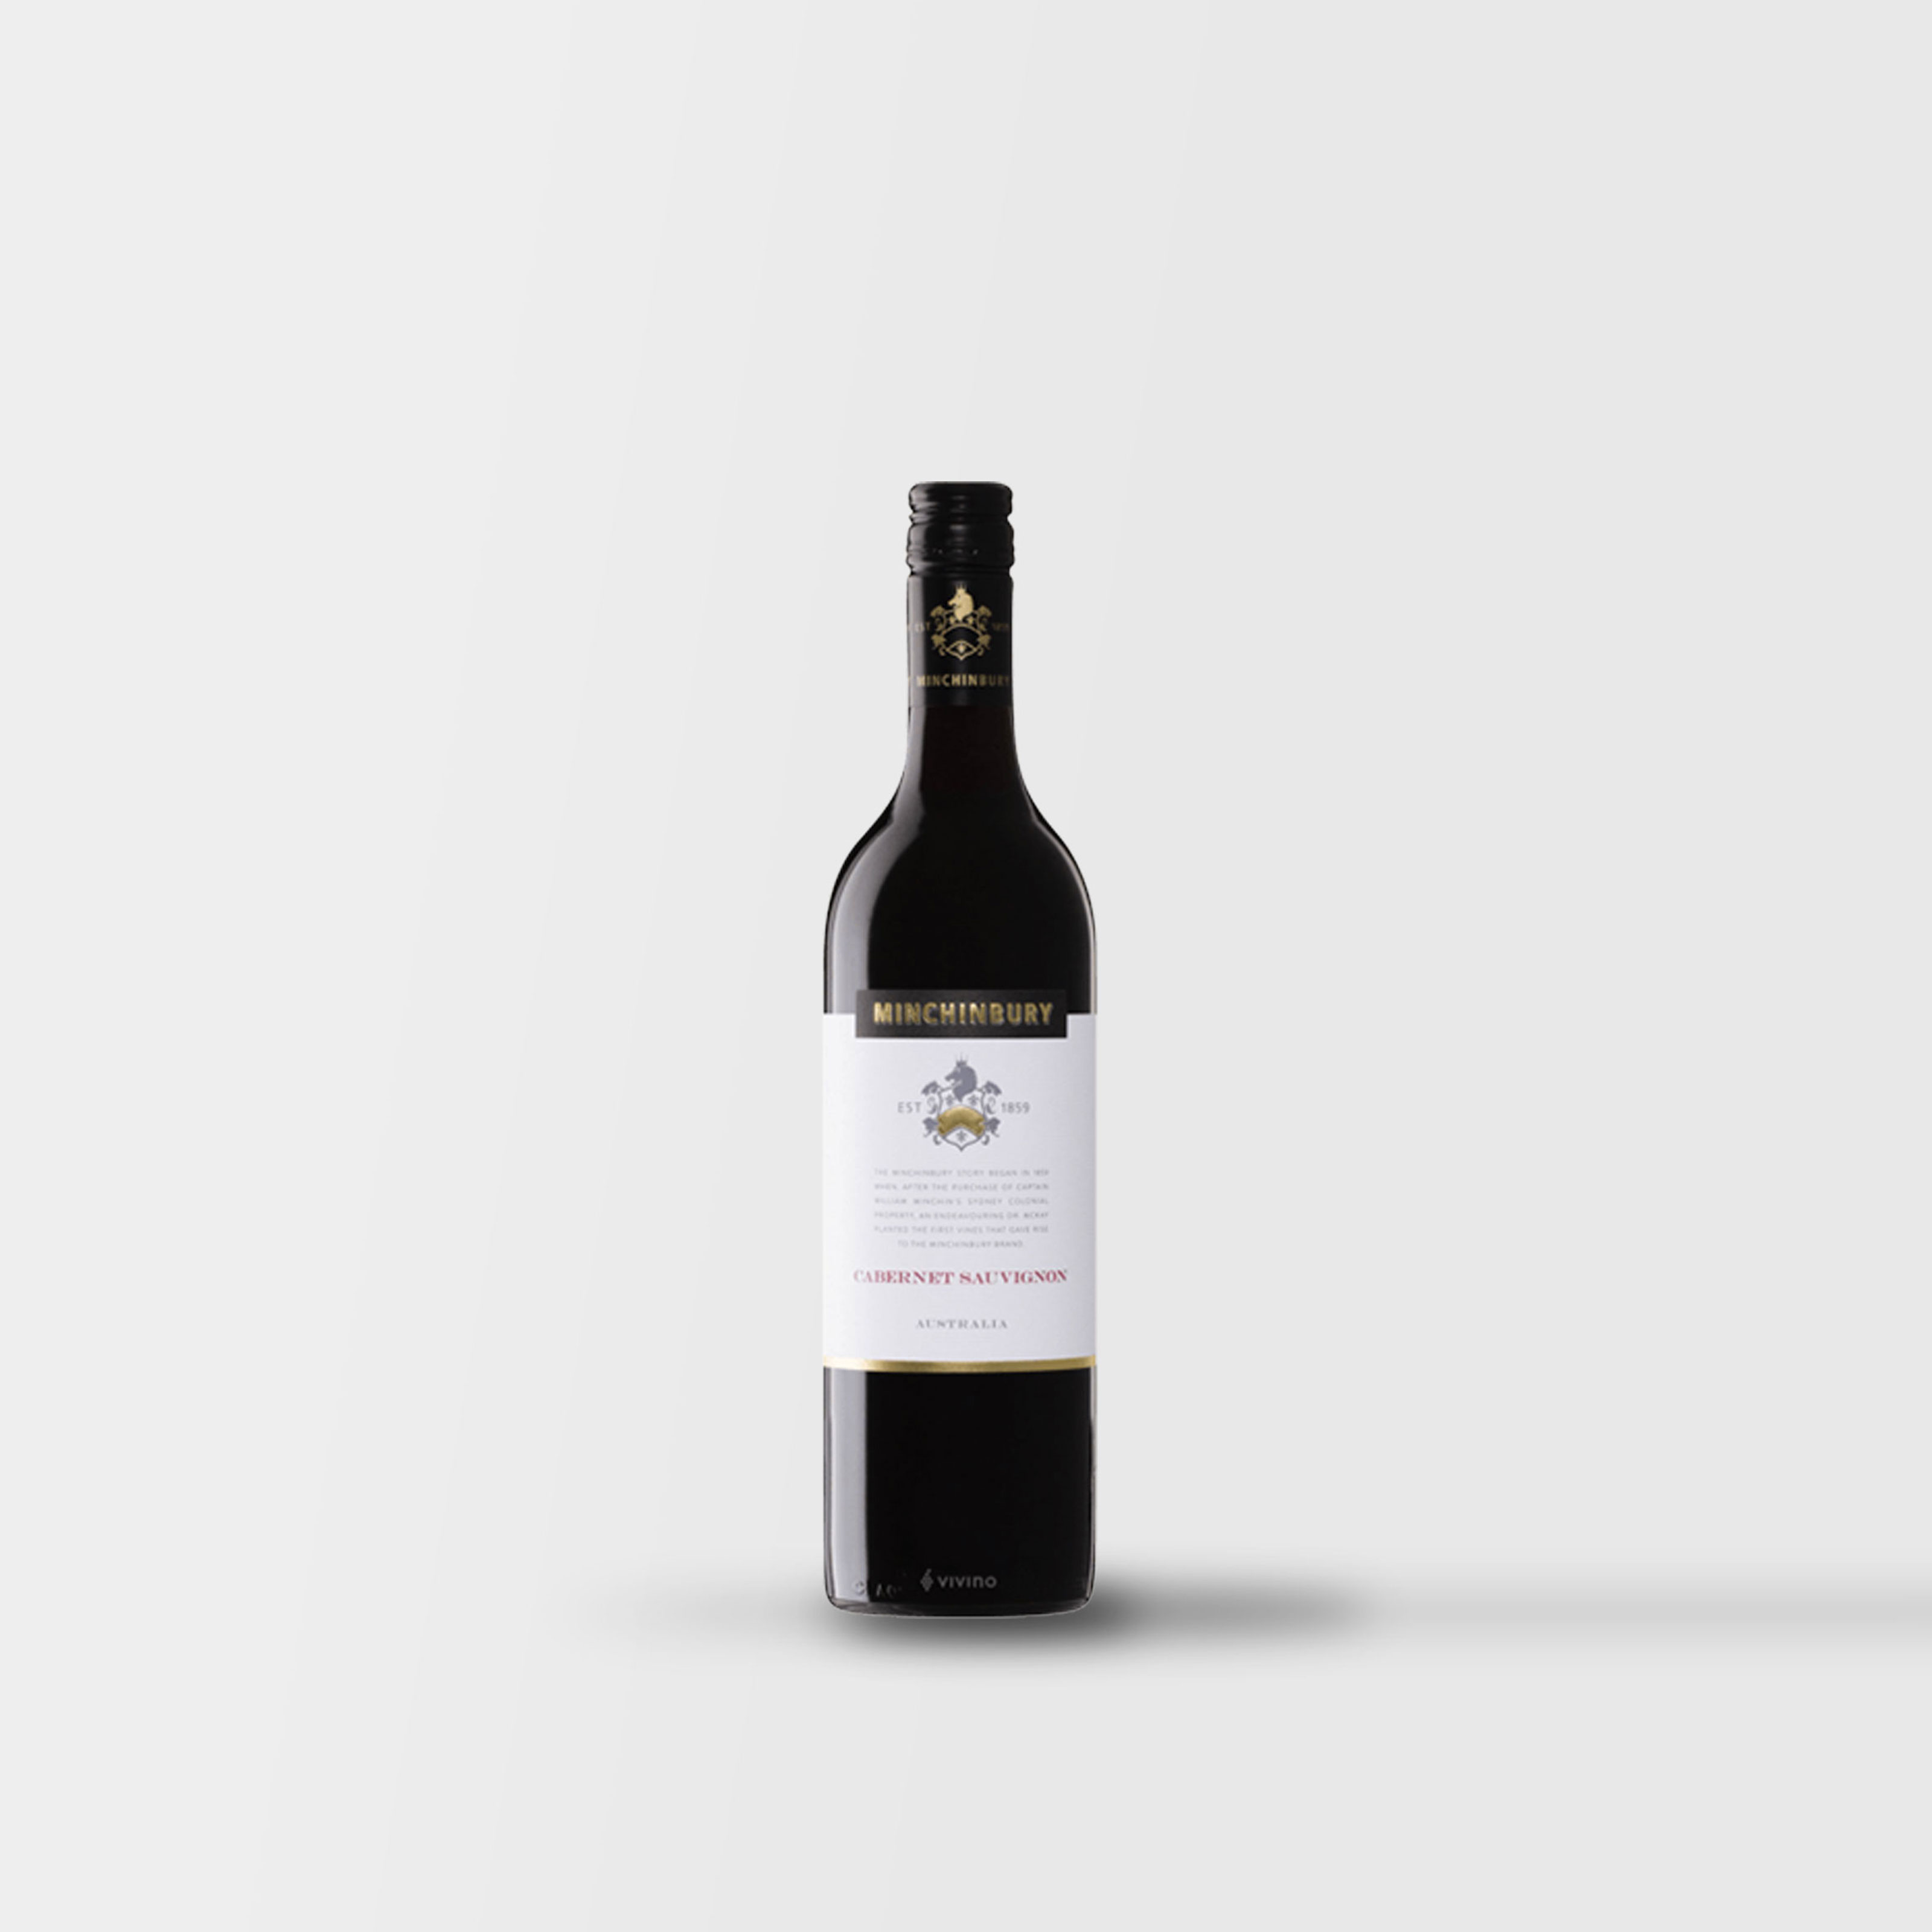 Buy Midnight Collective Cabernet Sauvignon online with (same-day FREE  delivery*) in Australia at Everyday Low Prices: BWS